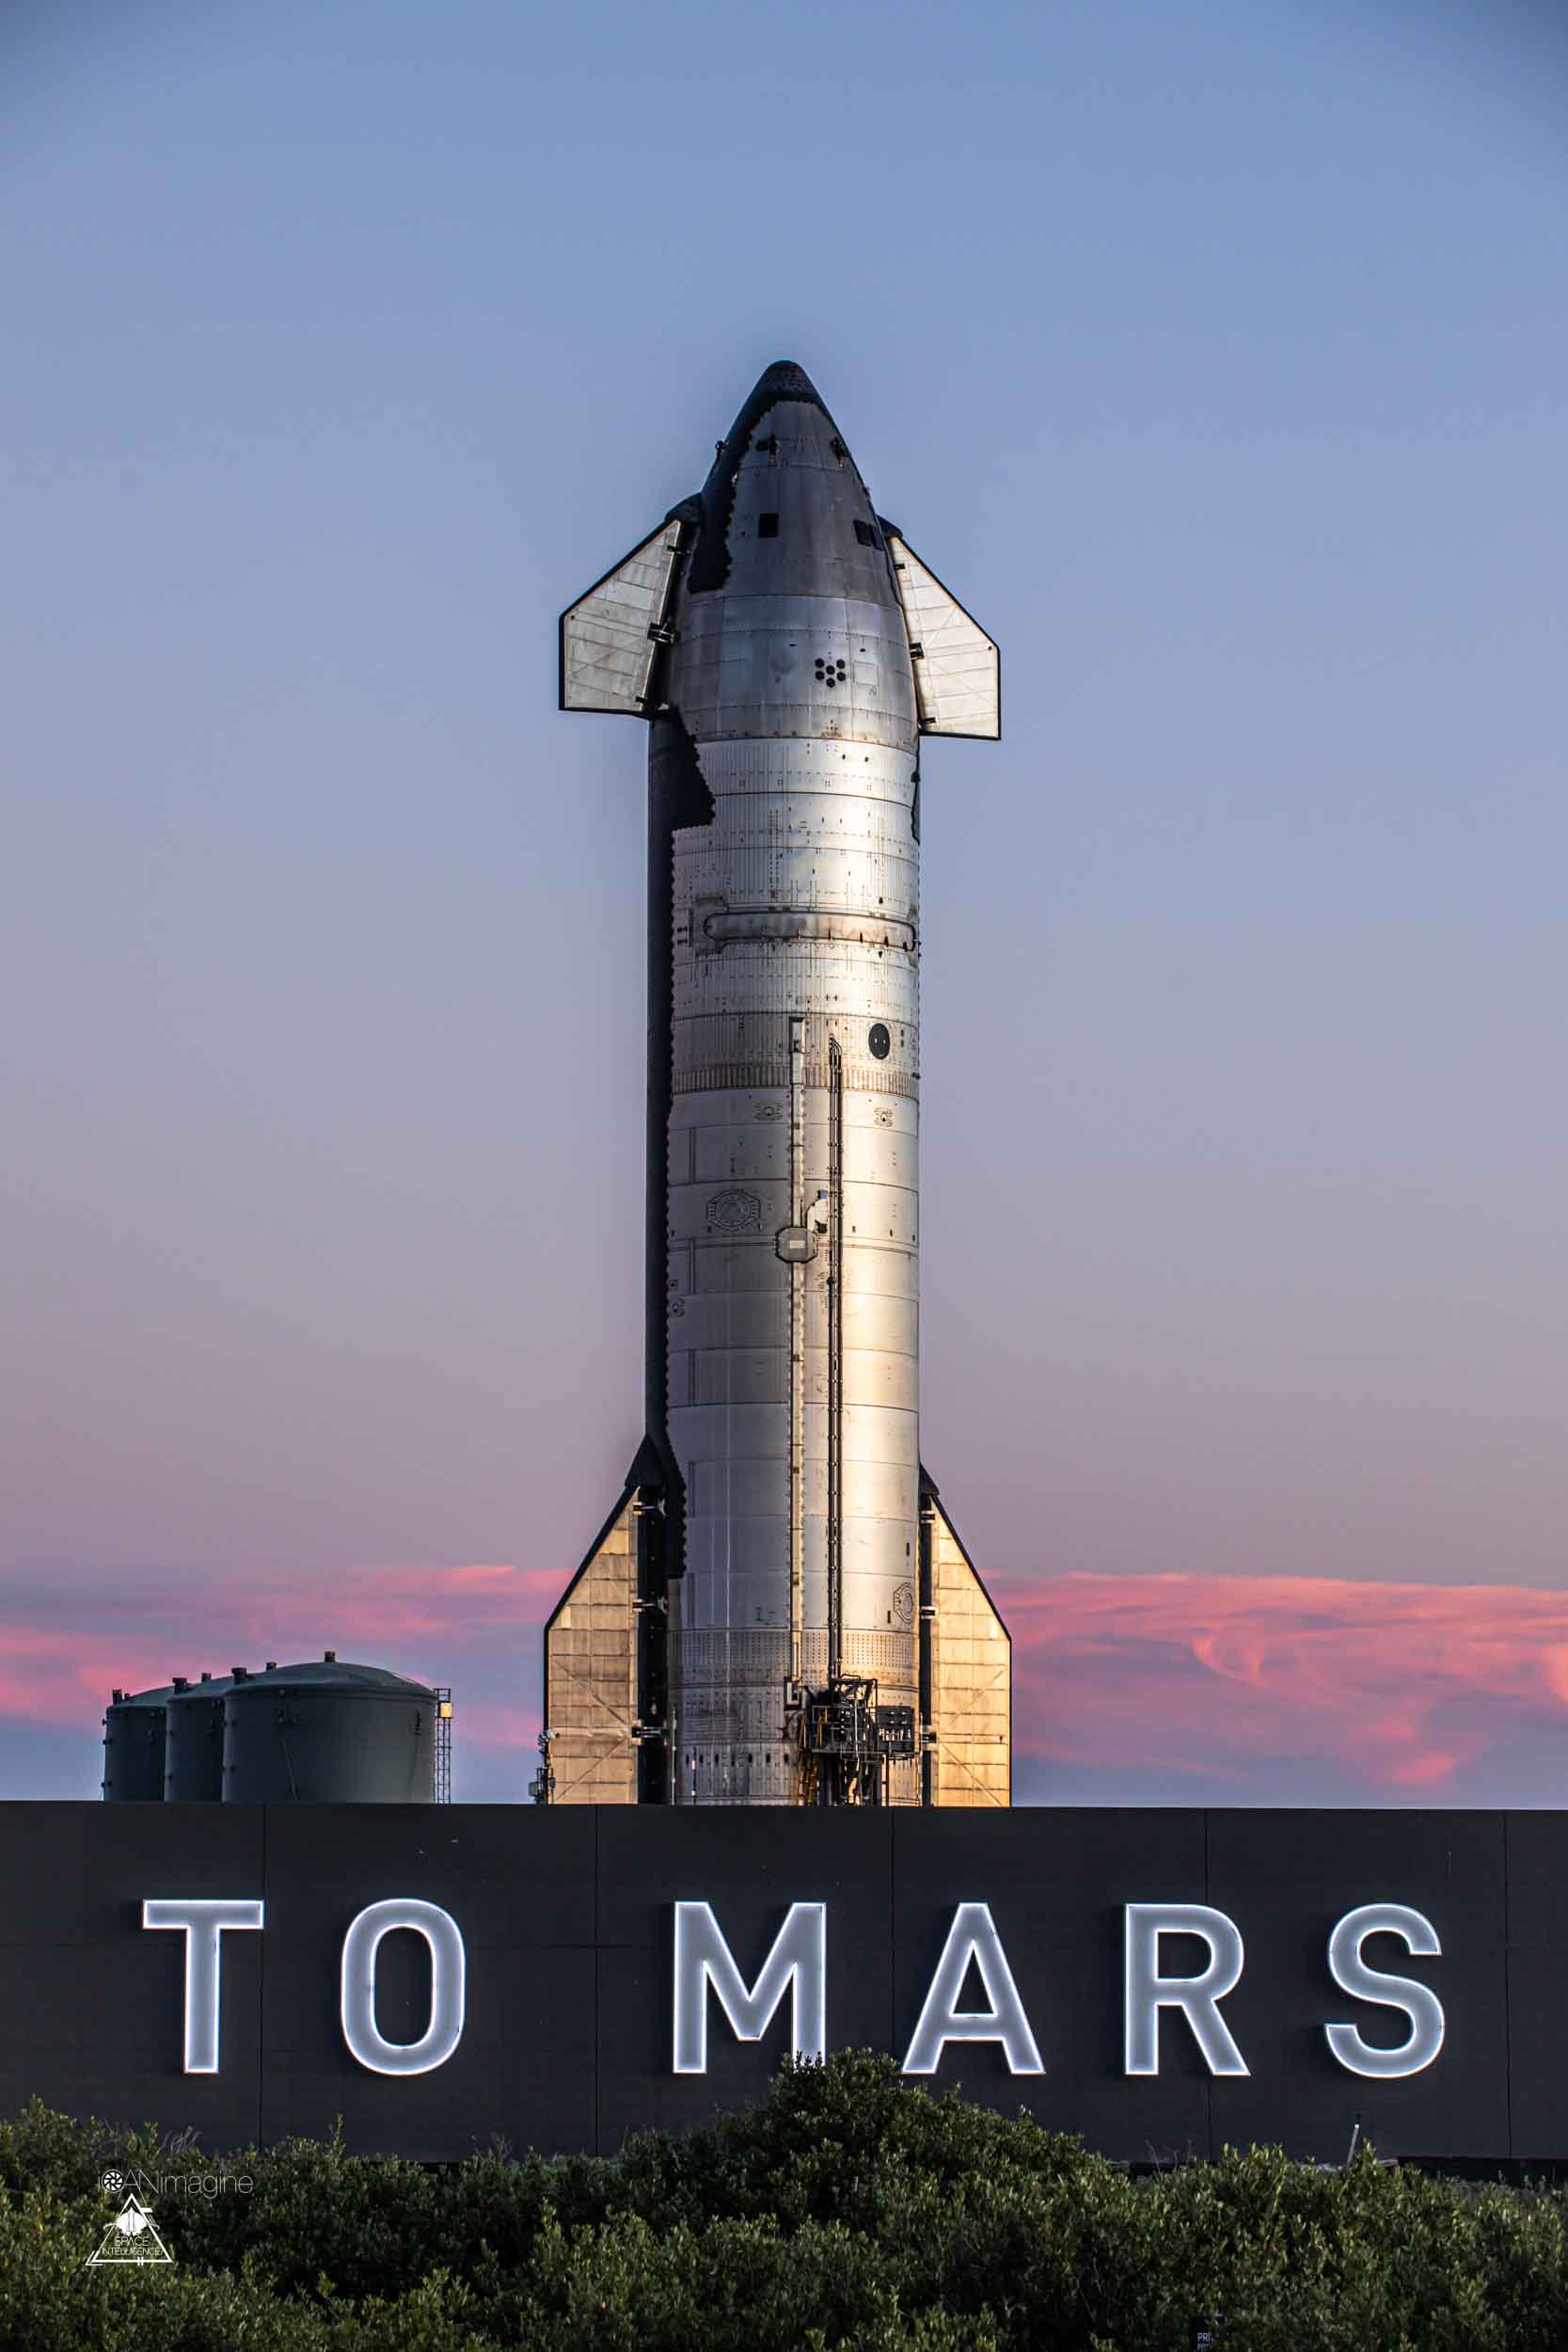 A Starship sits behind the "To Mars" sign.